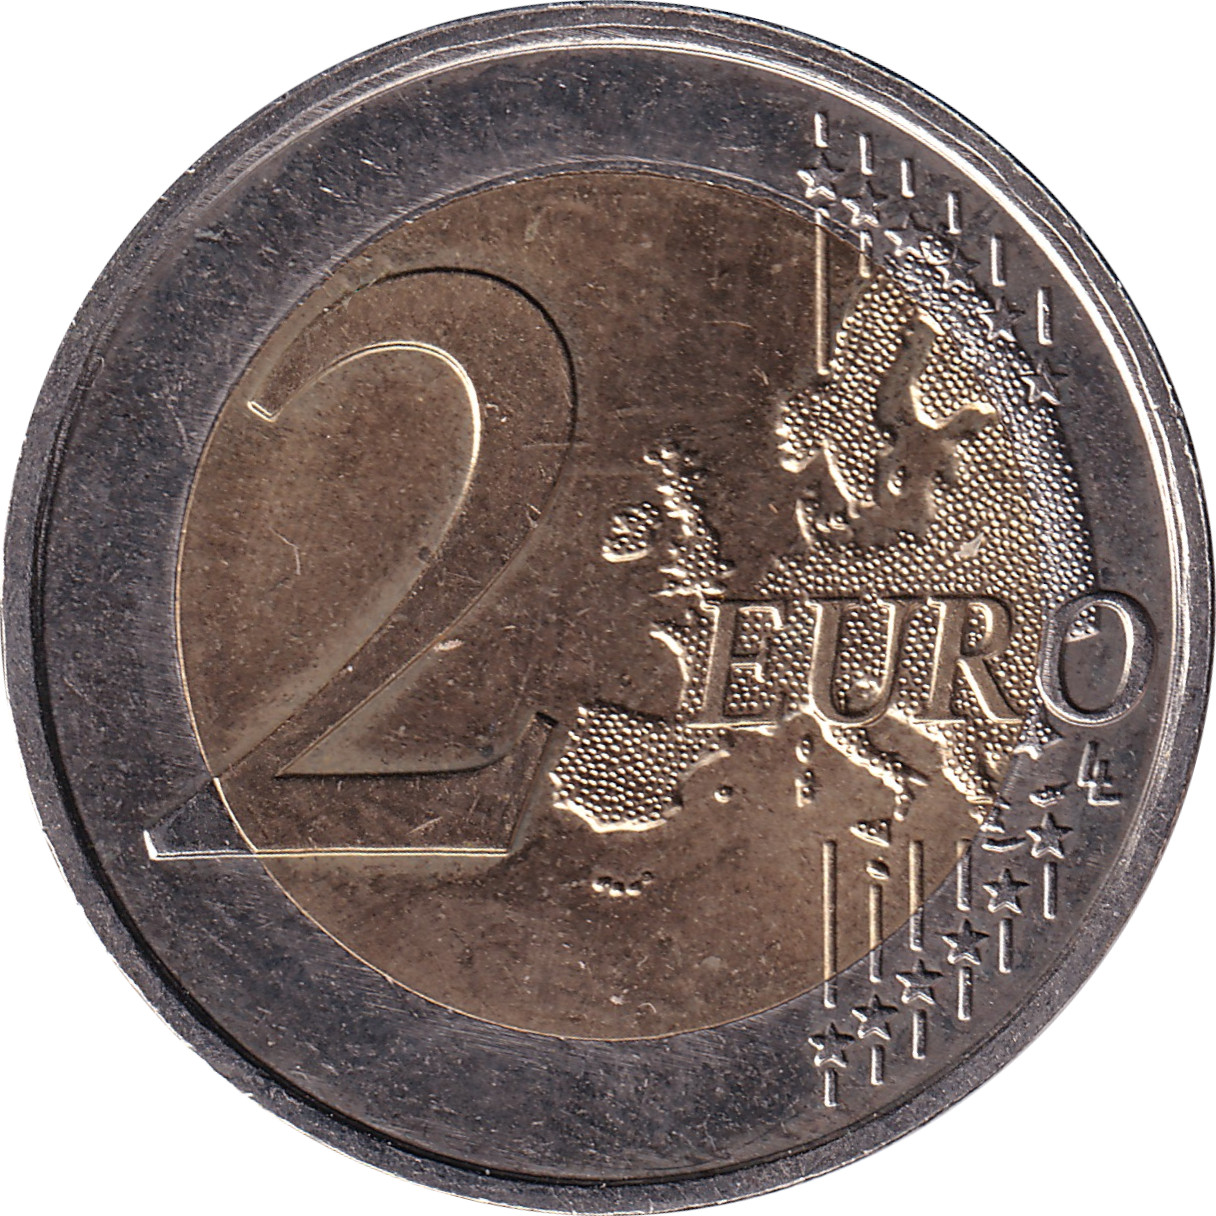 2 euro - Fight against cancer